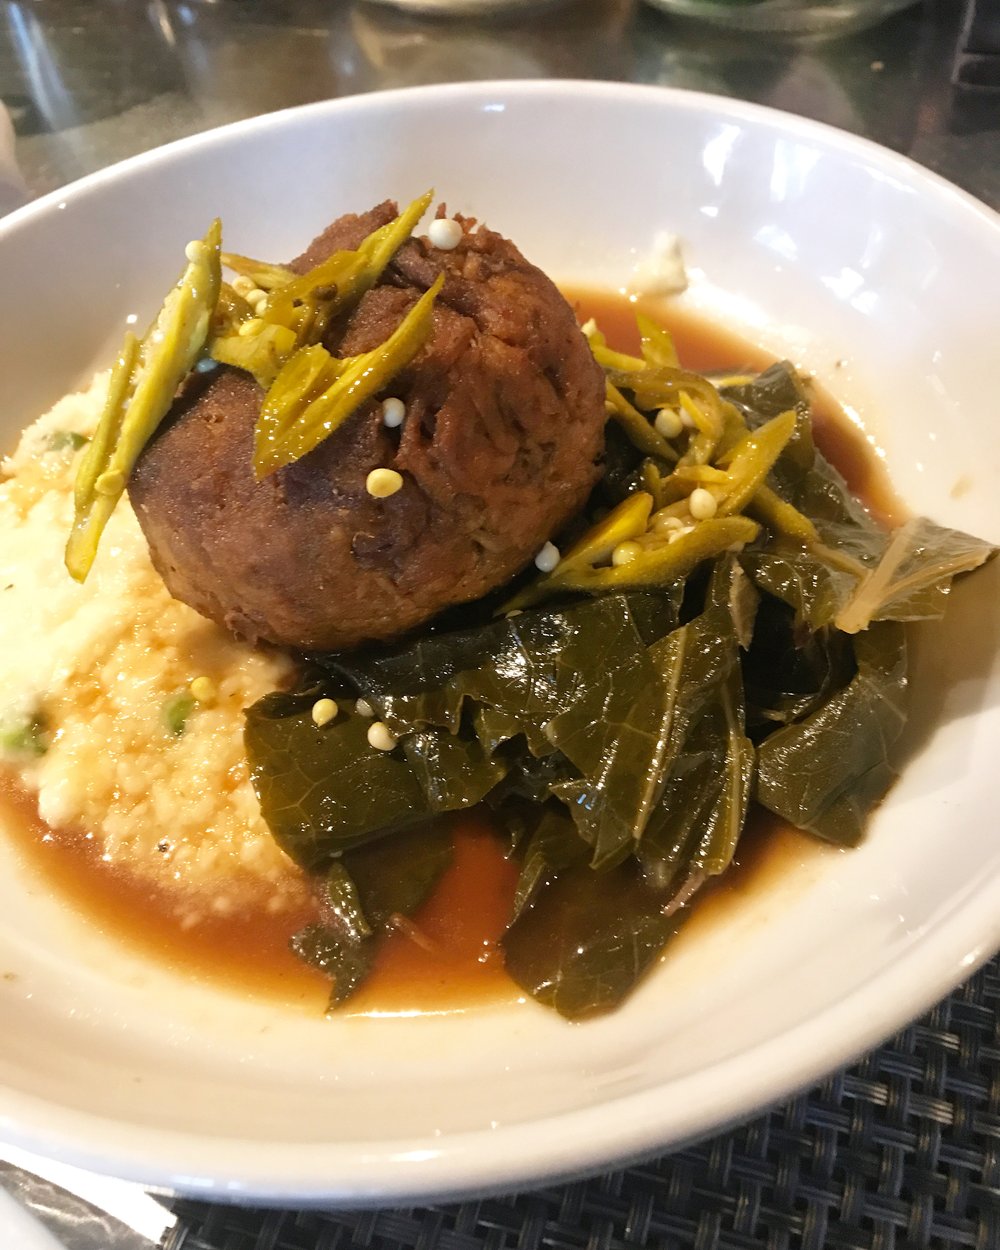 Pulled pork with picked okra, collard greens, and cheesey grits, Cochon Butcher NOLA